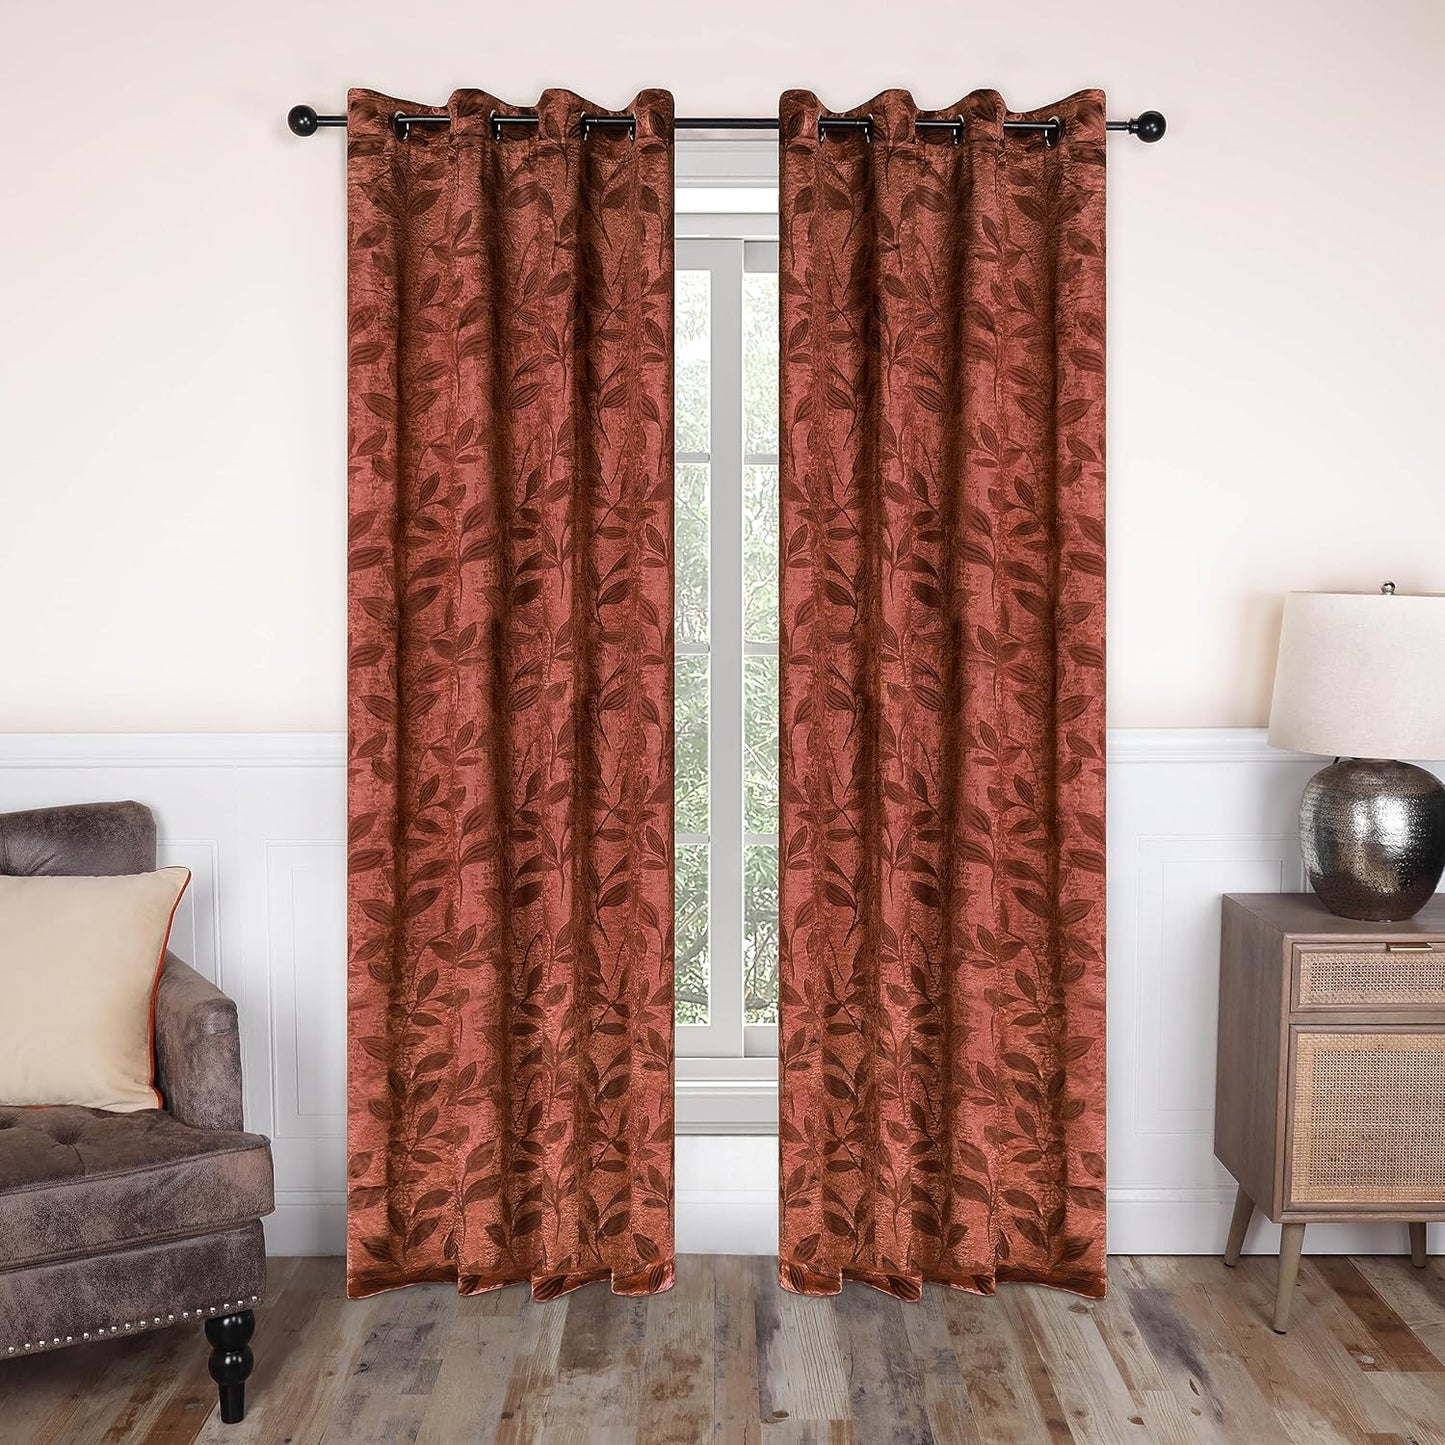 Superior Blackout Curtains, Room Darkening Window Accent for Bedroom, Sun Blocking, Thermal, Modern Bohemian Curtains, Leaves Collection, Set of 2 Panels, Rod Pocket - 52 in X 63 In, Nickel Black  Home City Inc. Antique Copper 52 In X 120 In (W X L) 